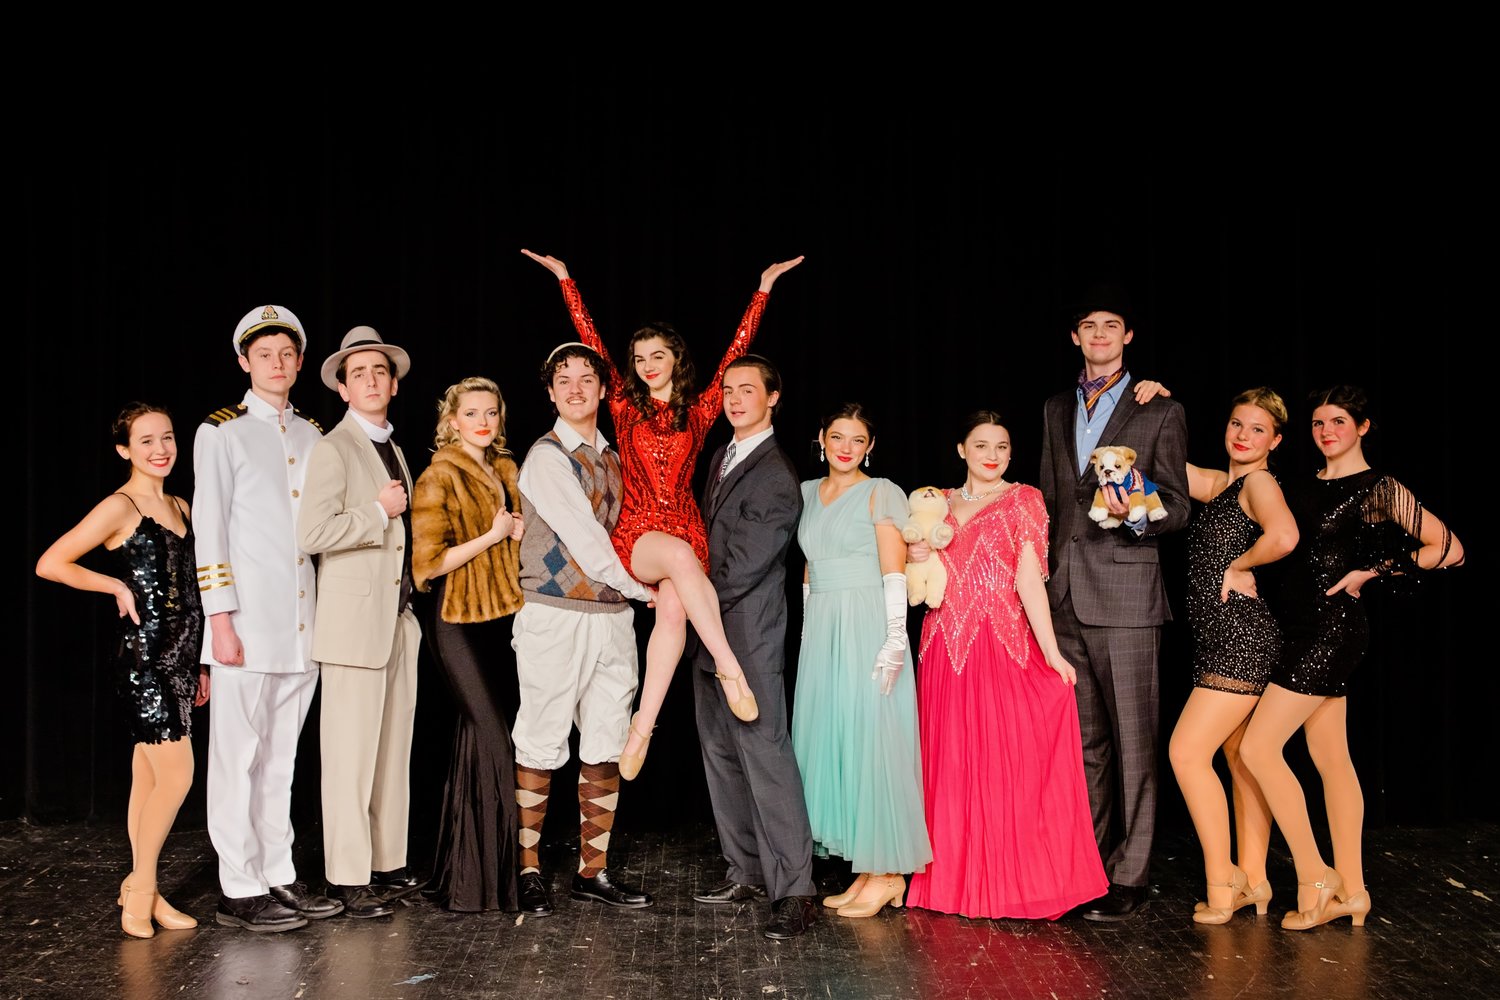 Gia Panno, Garrett Falkenstein, Griffan Arbogast, Molly Cochran, Riley Malone, Anna Shea Safran, Jackson Manning, Ella Patras, Anna Polsky, Pearce Mensching, Molly Mitchell and Katie Meeks are from the cast of Central Bucks West Harlequin Club’s “Anything Goes.”